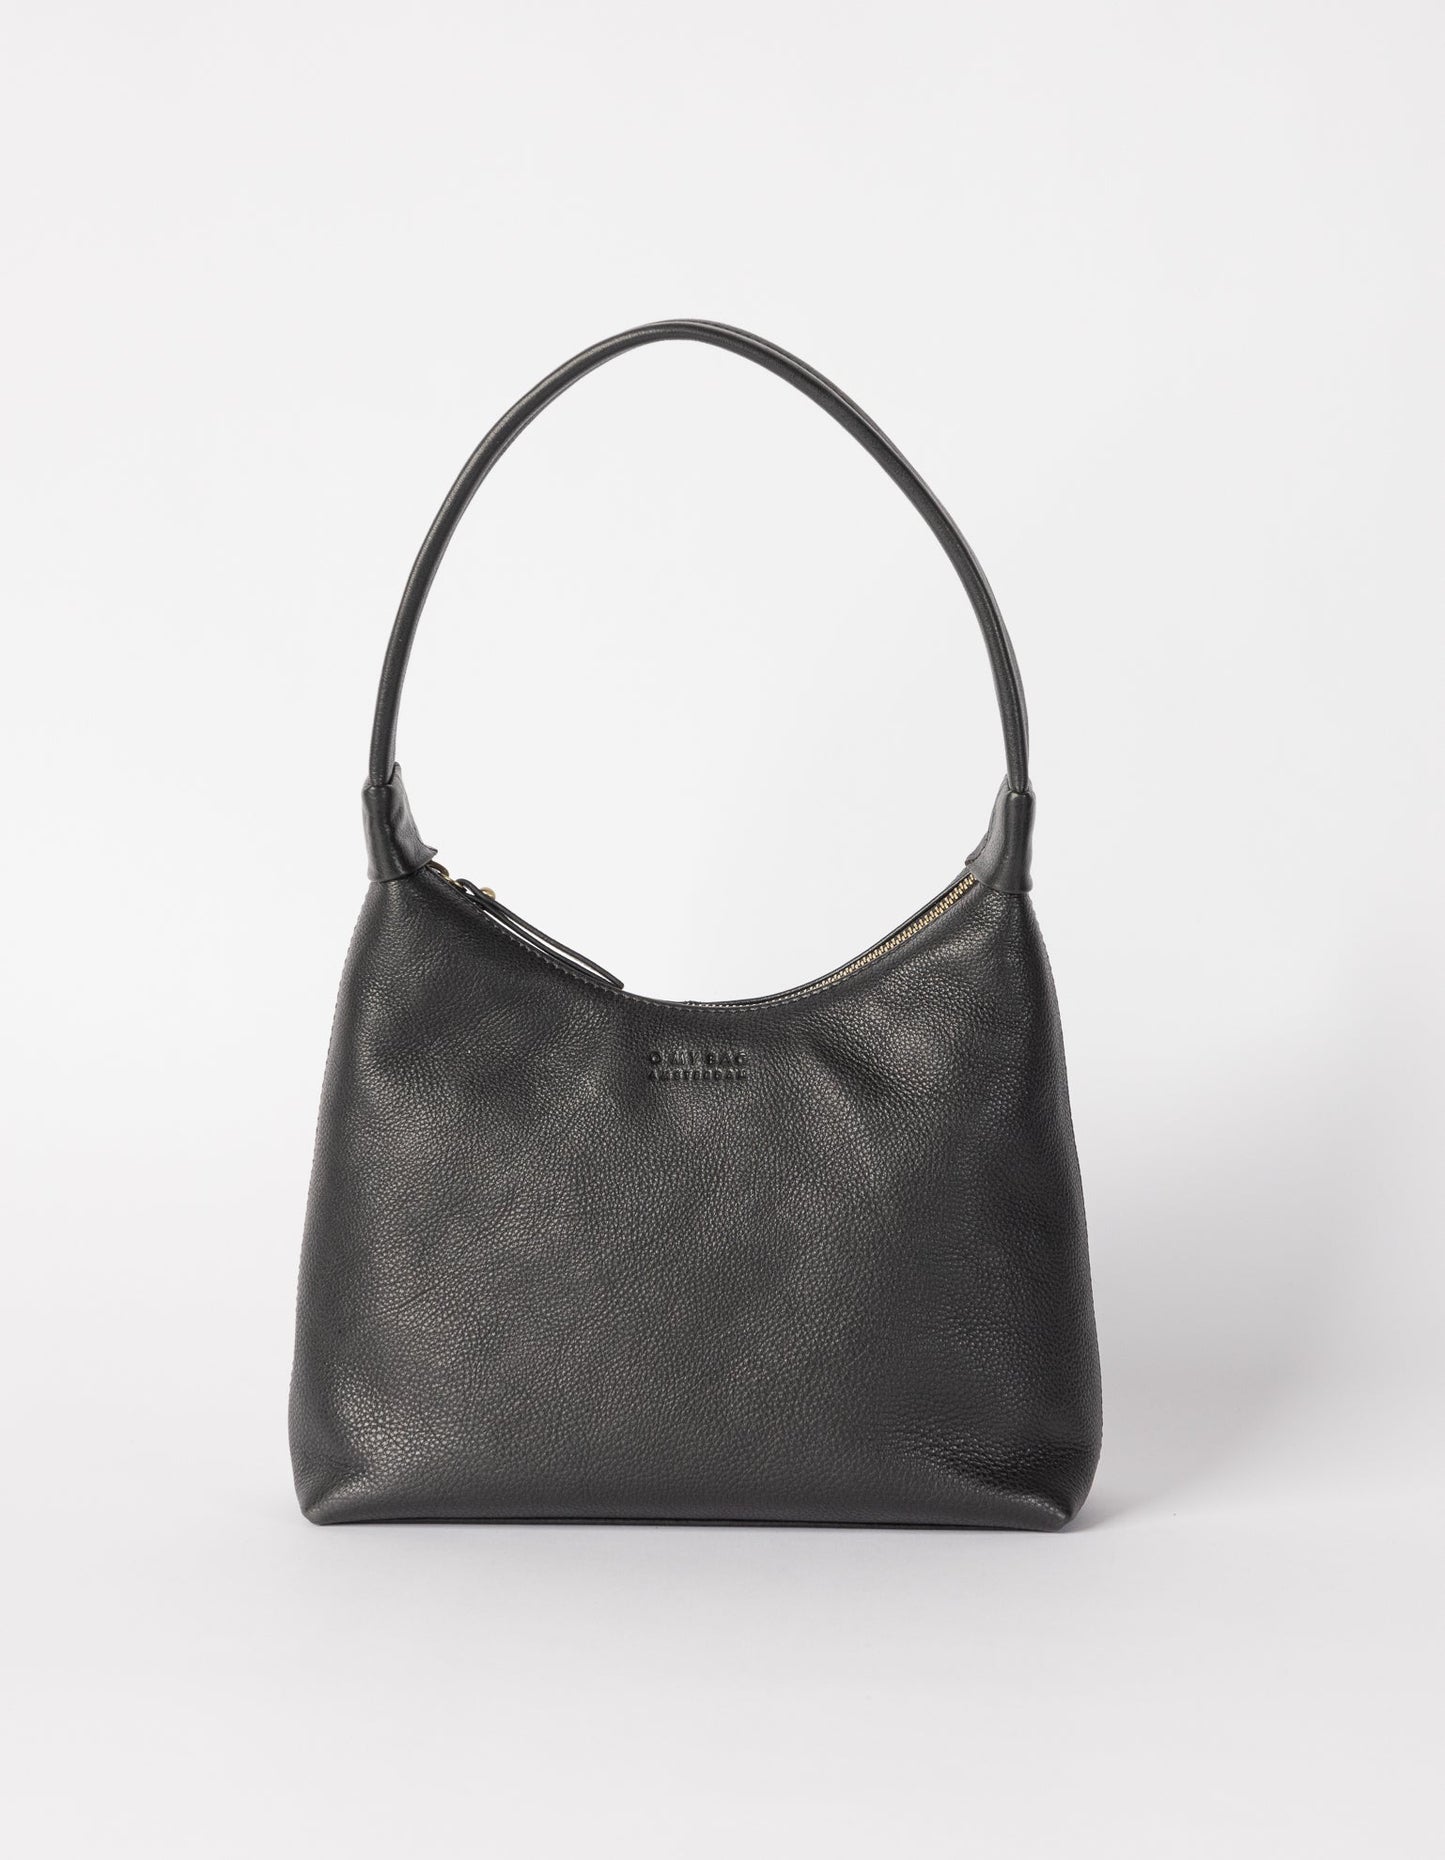 O My Bag Nora Leather Bag in Black